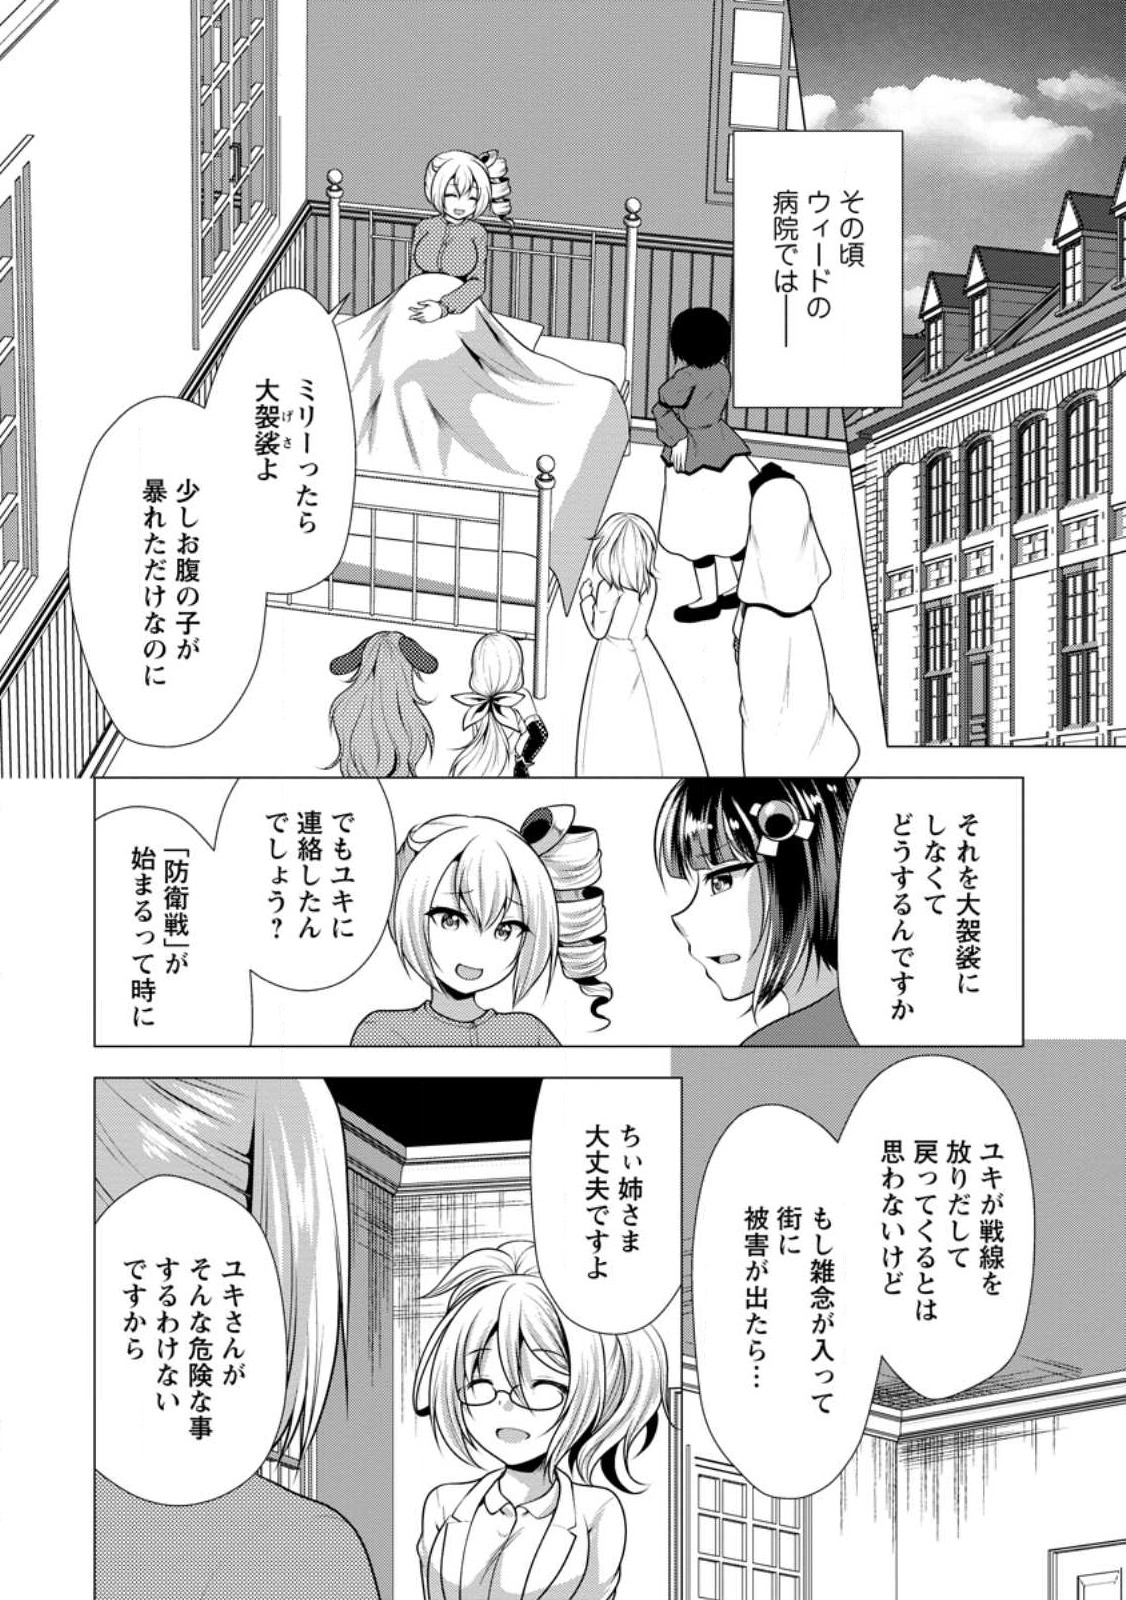 Hisshou Dungeon Unei Houhou - Chapter 58.2 - Page 2